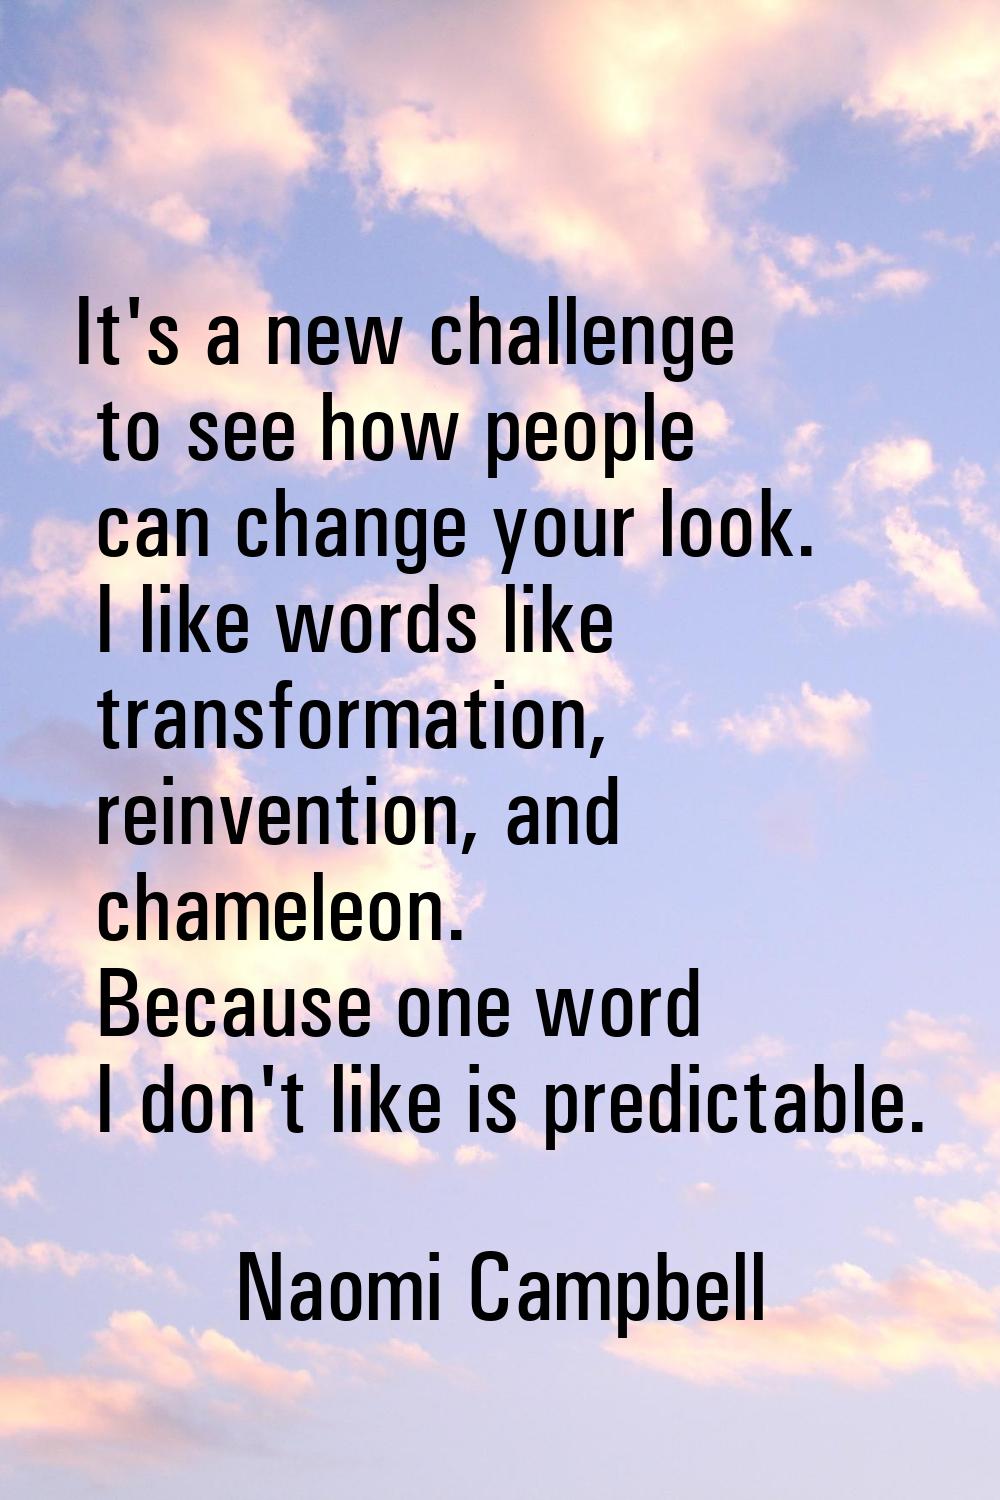 It's a new challenge to see how people can change your look. I like words like transformation, rein